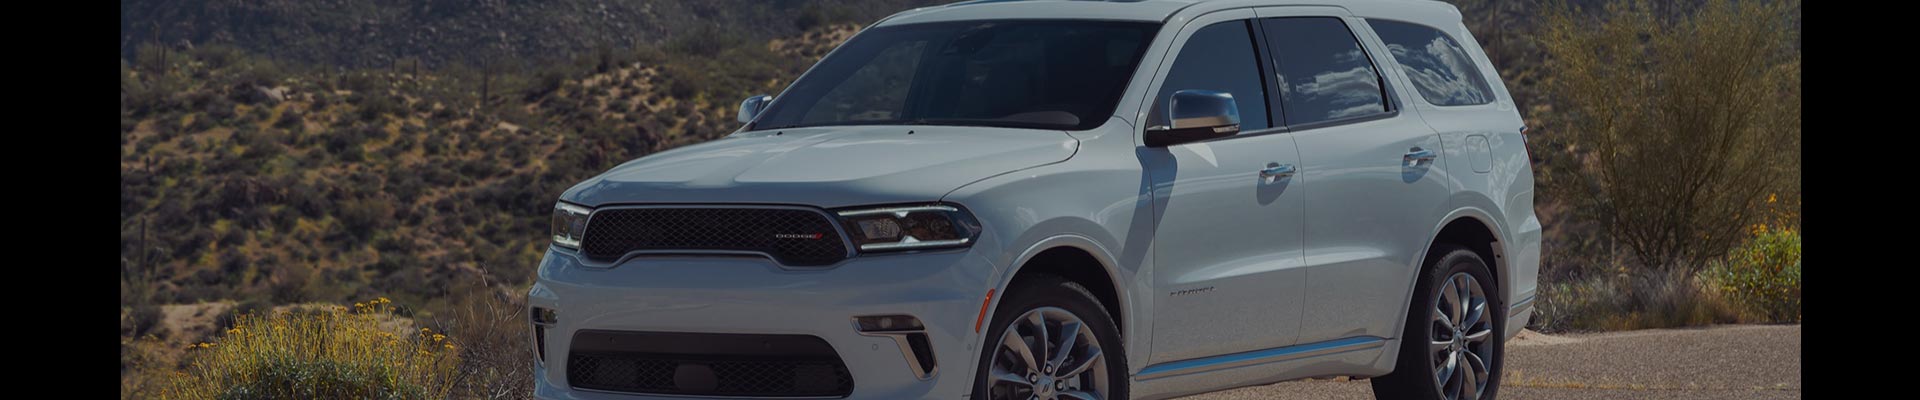 Shop Replacement and OEM Dodge Durango Parts with Discounted Price on the Net